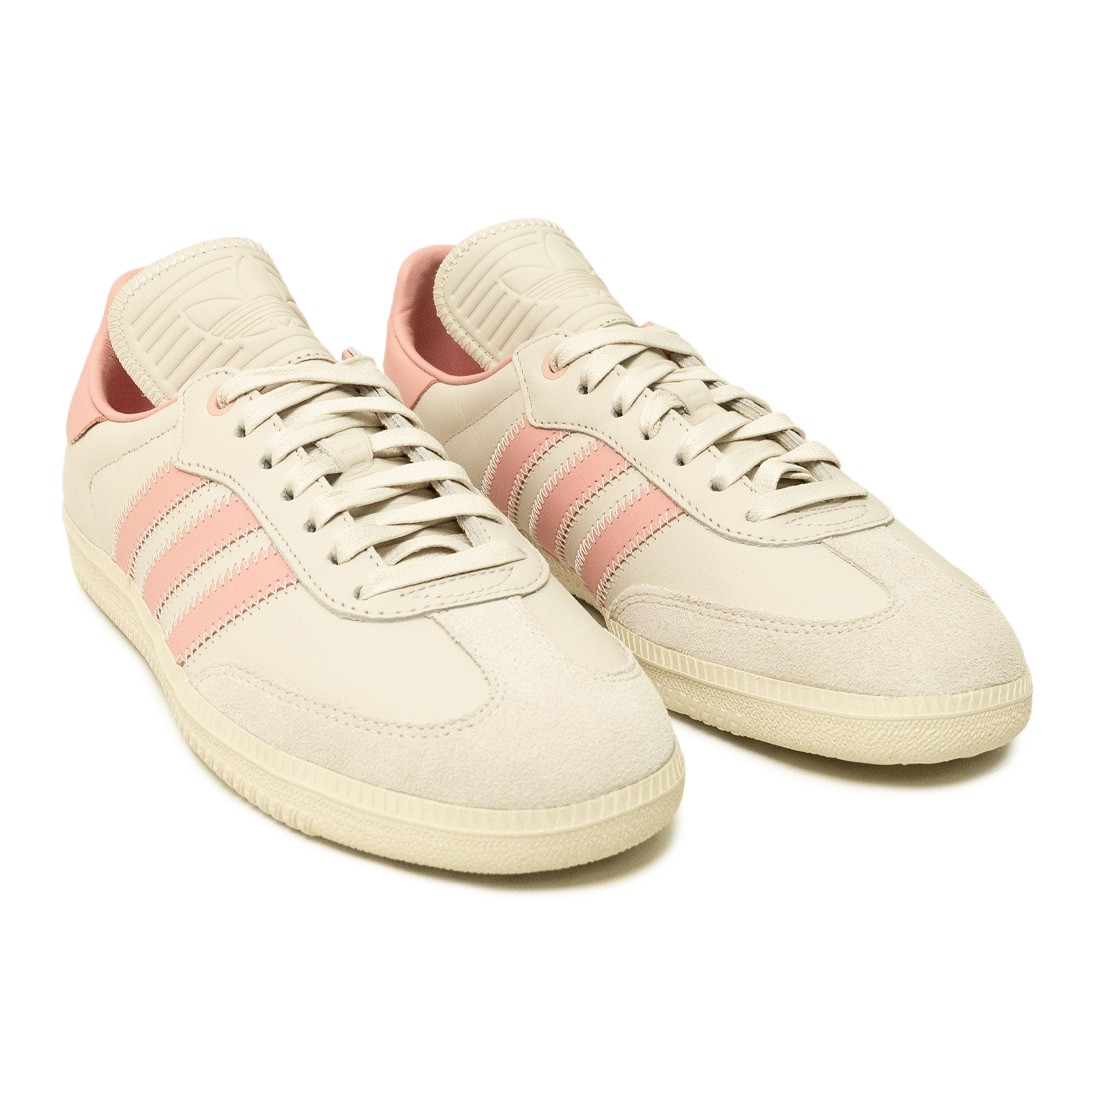 adidas busenitz on sale today price in mexico